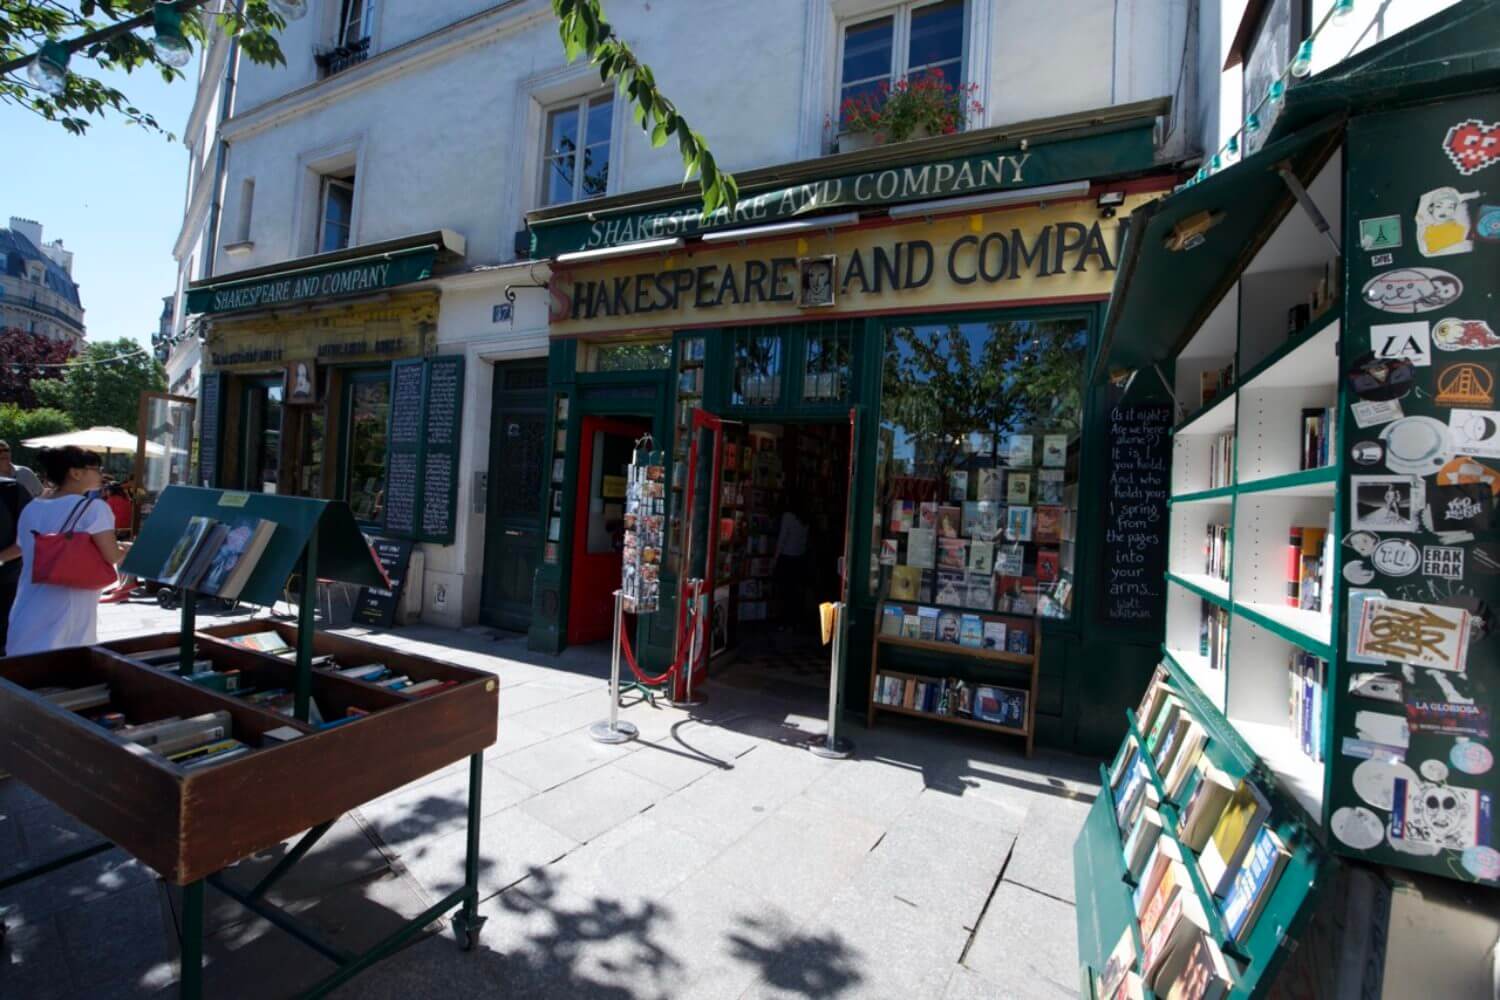 Shakespeare and Company - Photo credit: Fantrippers